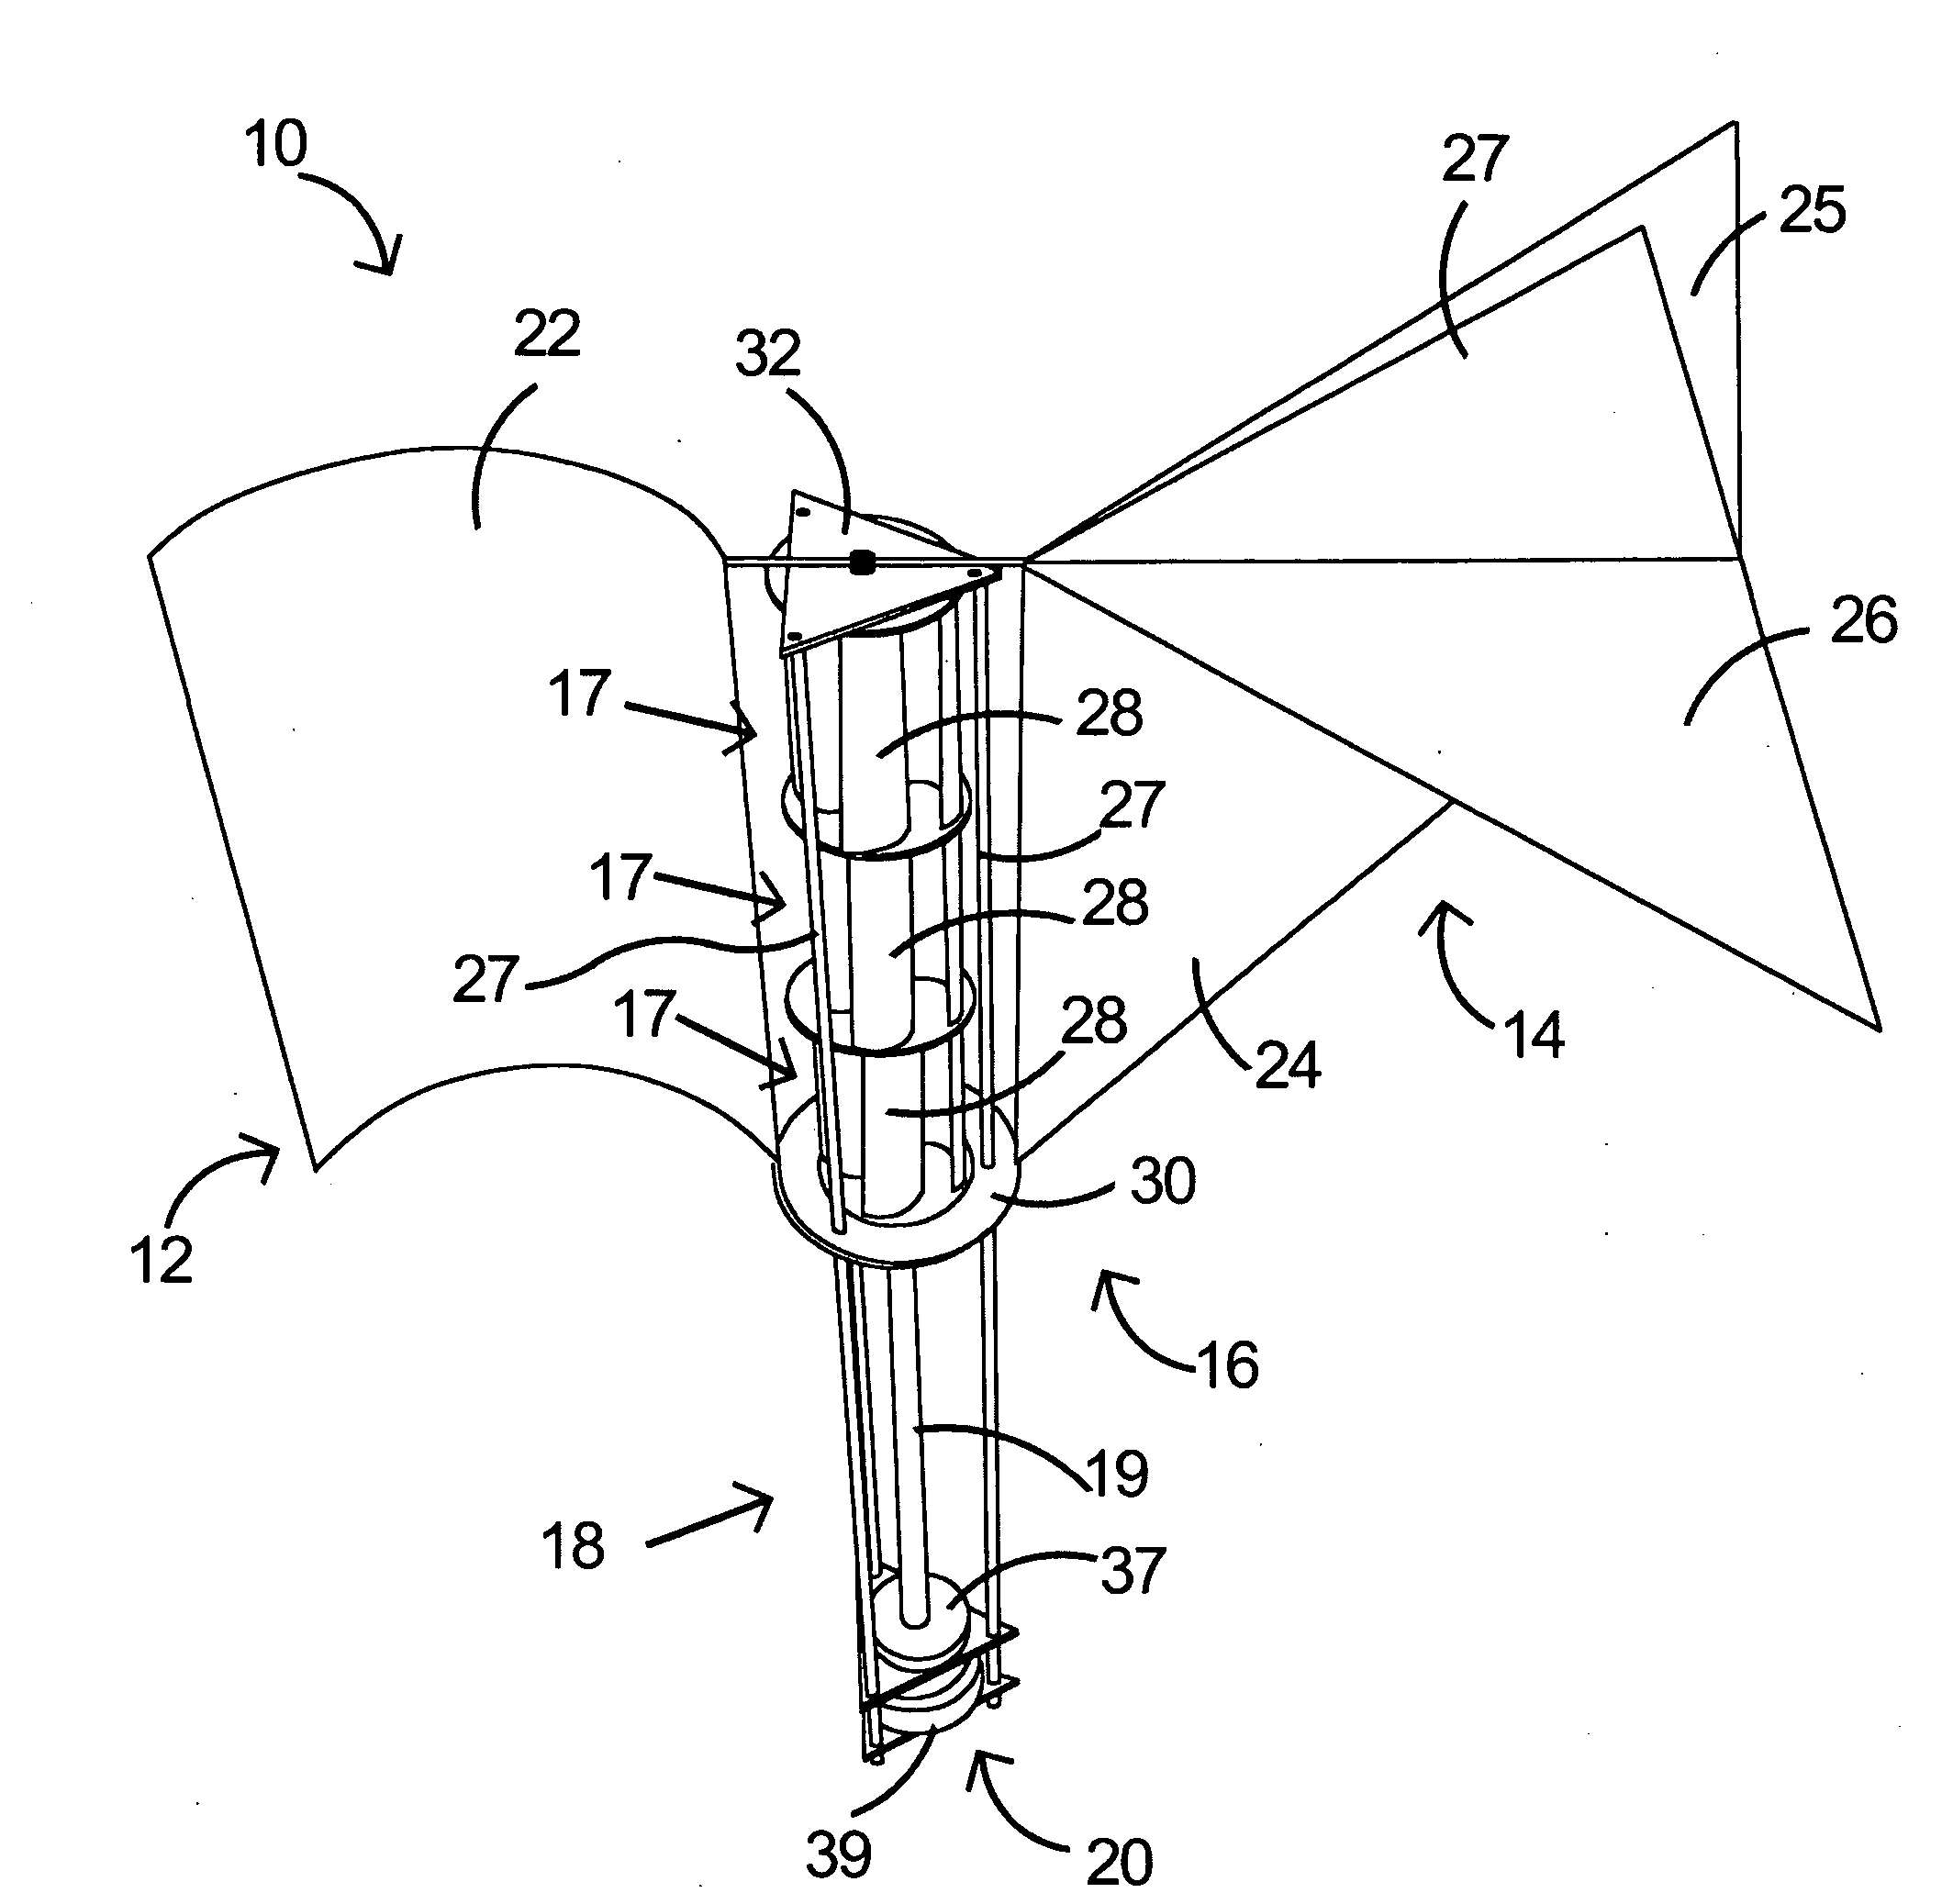 Multi-Axis Wind Turbine With Power Concentrator Sail